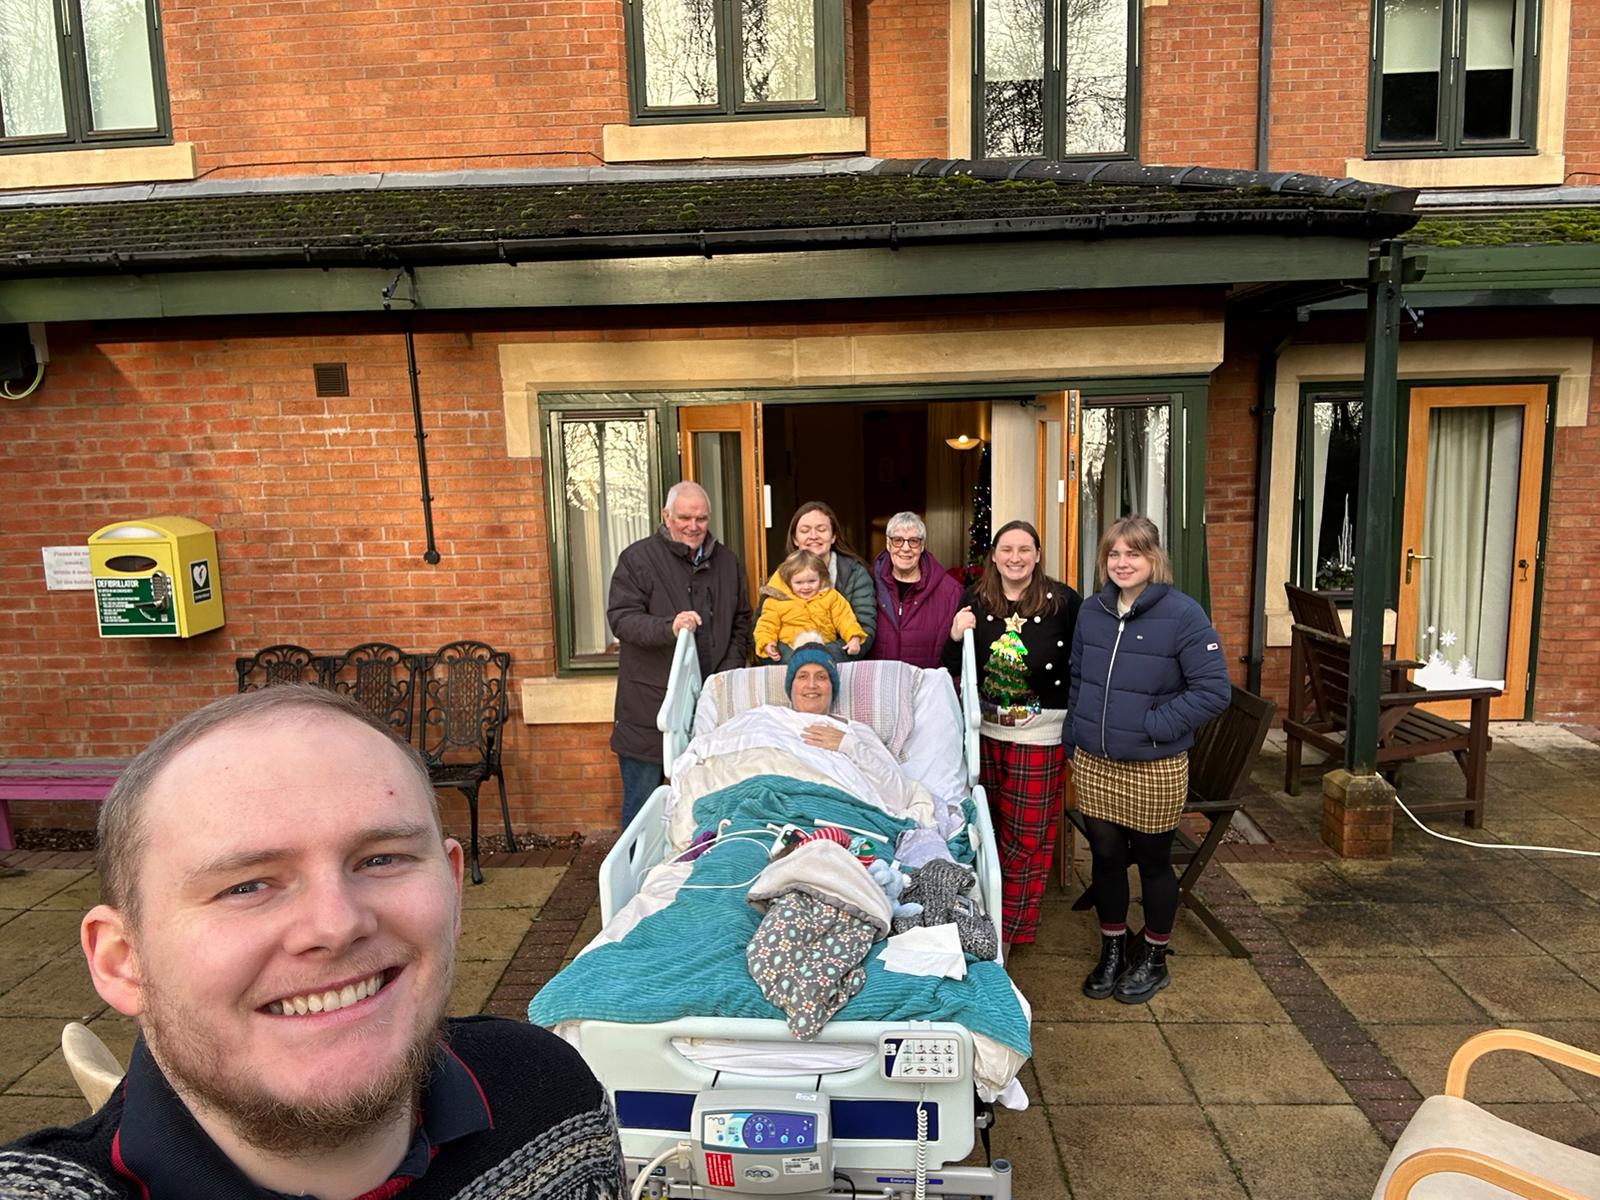 Marie in her bed outdoors with her family on Christmas Day at the hospice.